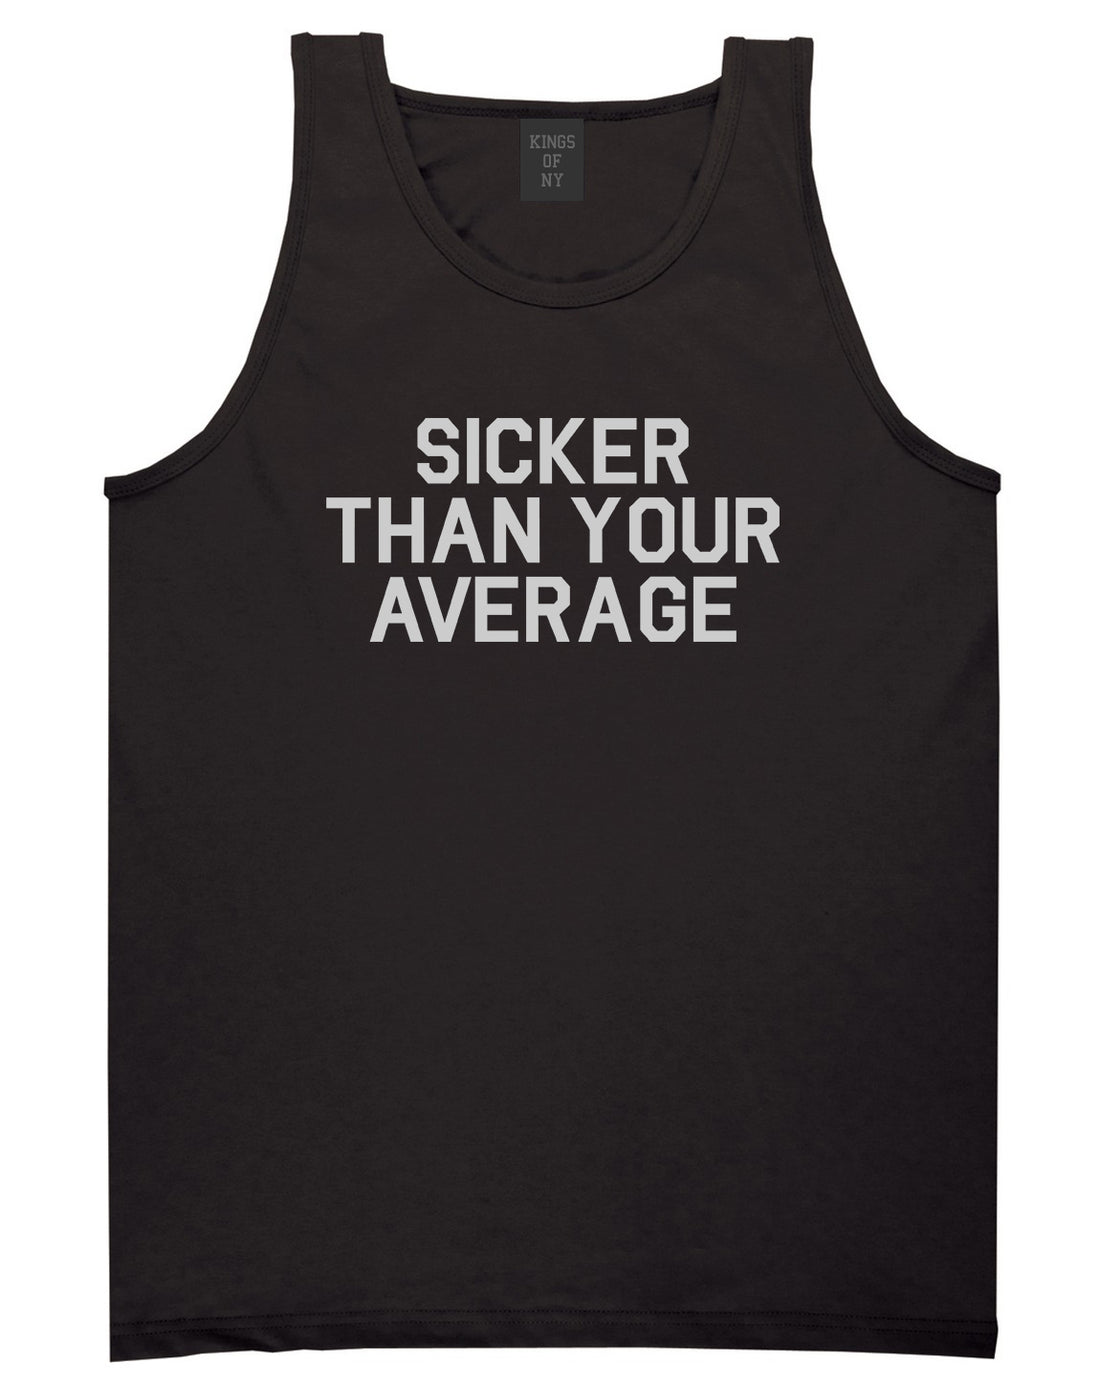 Sicker Than Your Average Tank Top Shirt in Black